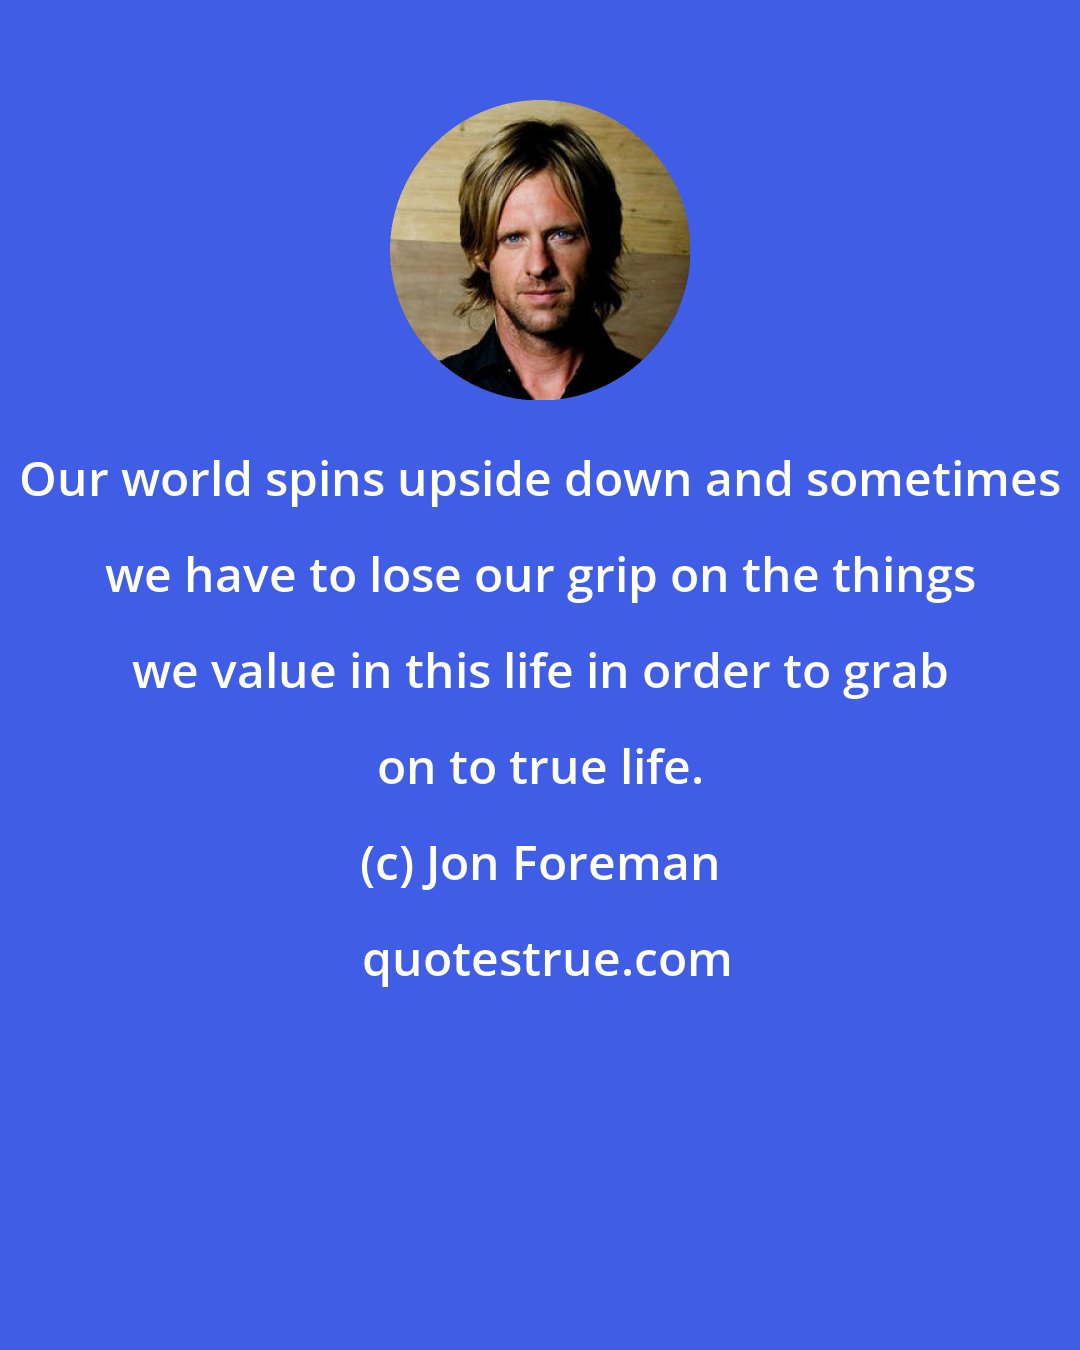 Jon Foreman: Our world spins upside down and sometimes we have to lose our grip on the things we value in this life in order to grab on to true life.